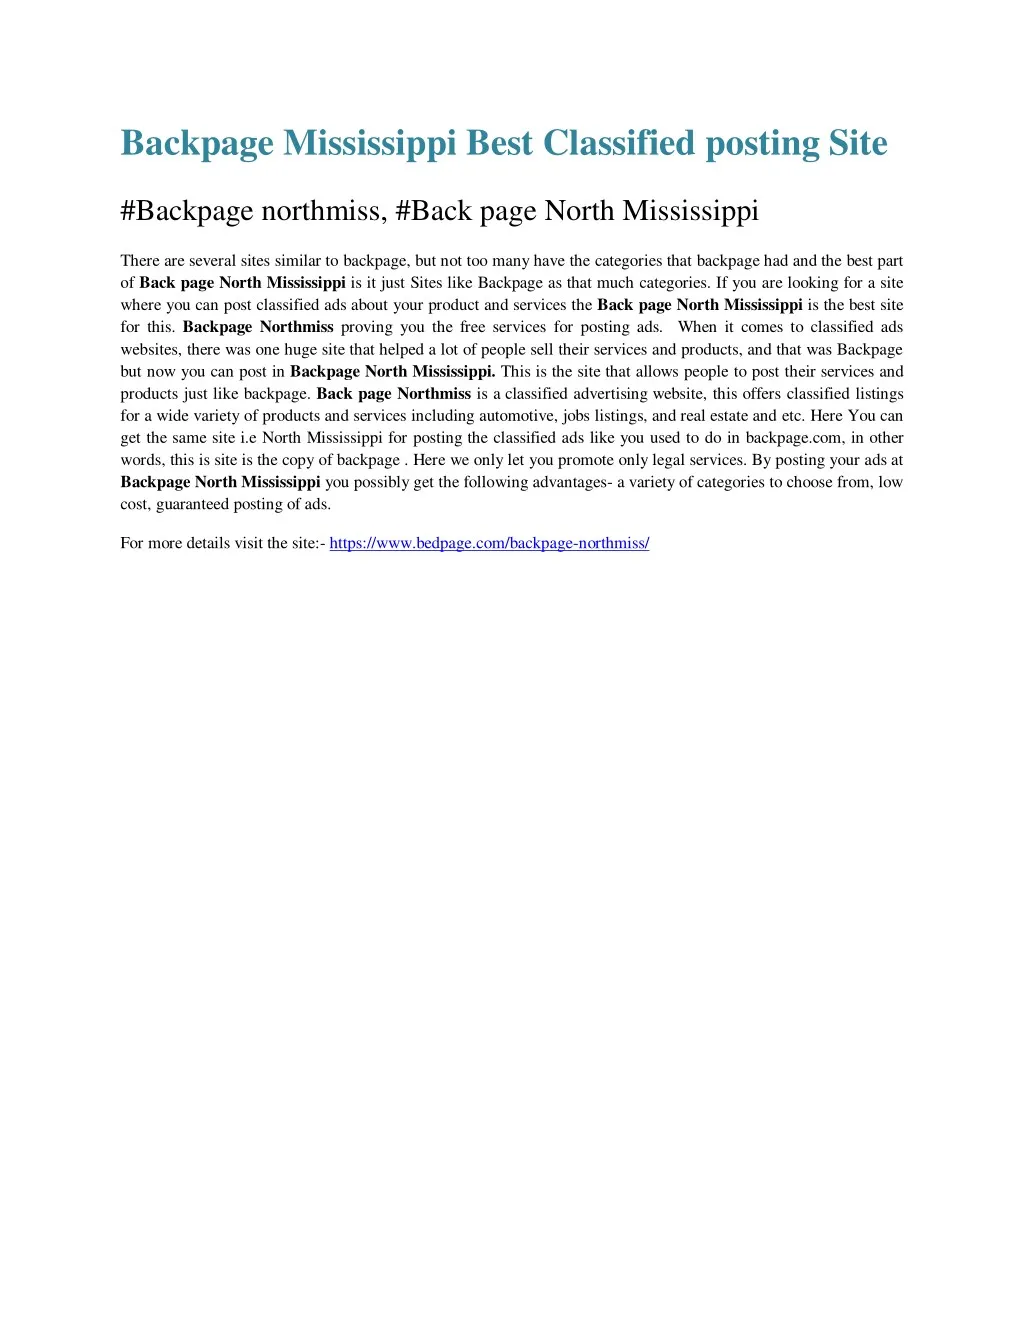 backpage mississippi best classified posting site